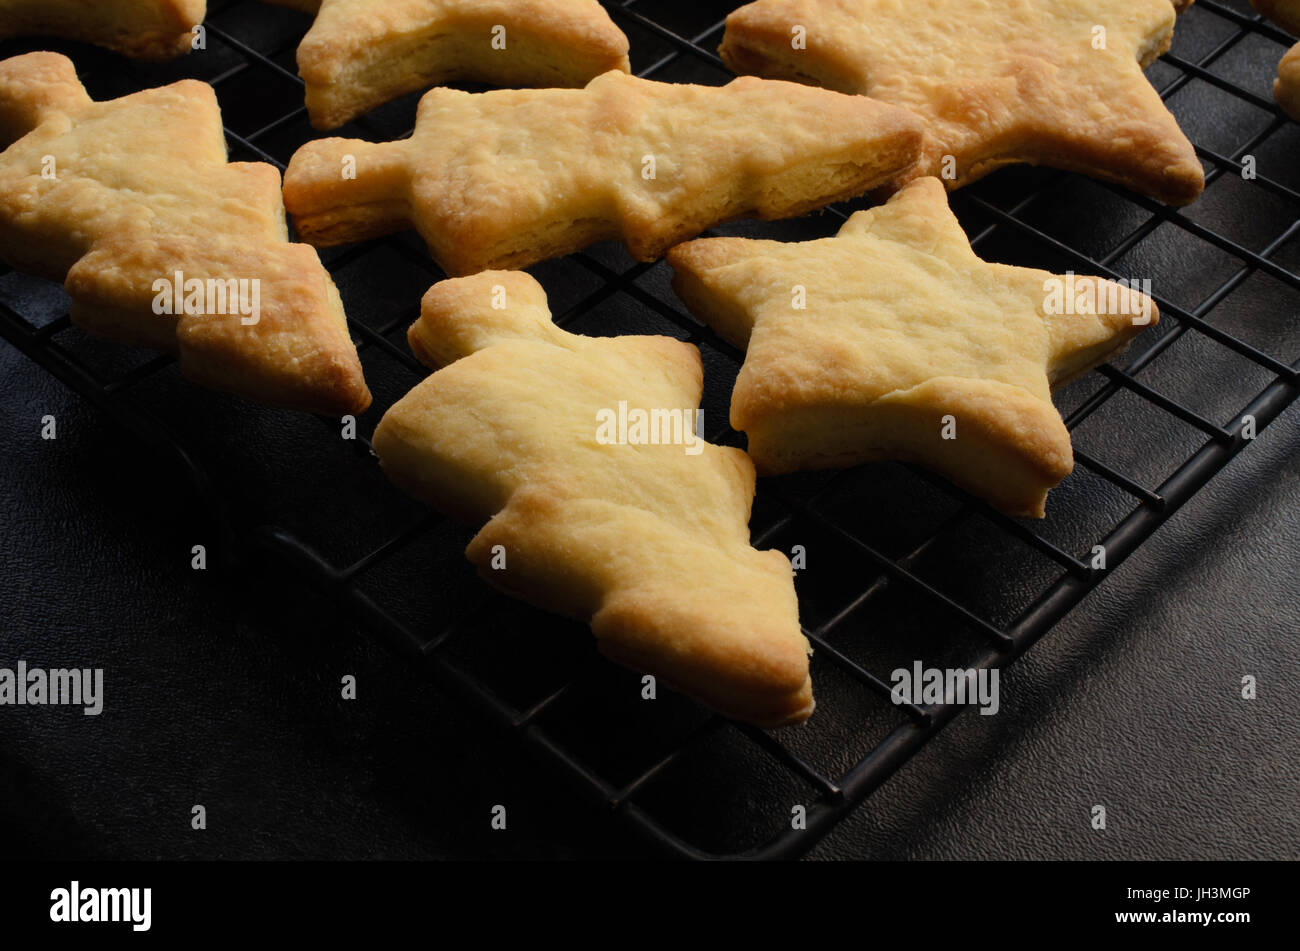 Just baked tree and star shaped Christmas biscuits (cookies), cooling on a black wire rack after removal from oven. Black kitchen worktop below. Stock Photo